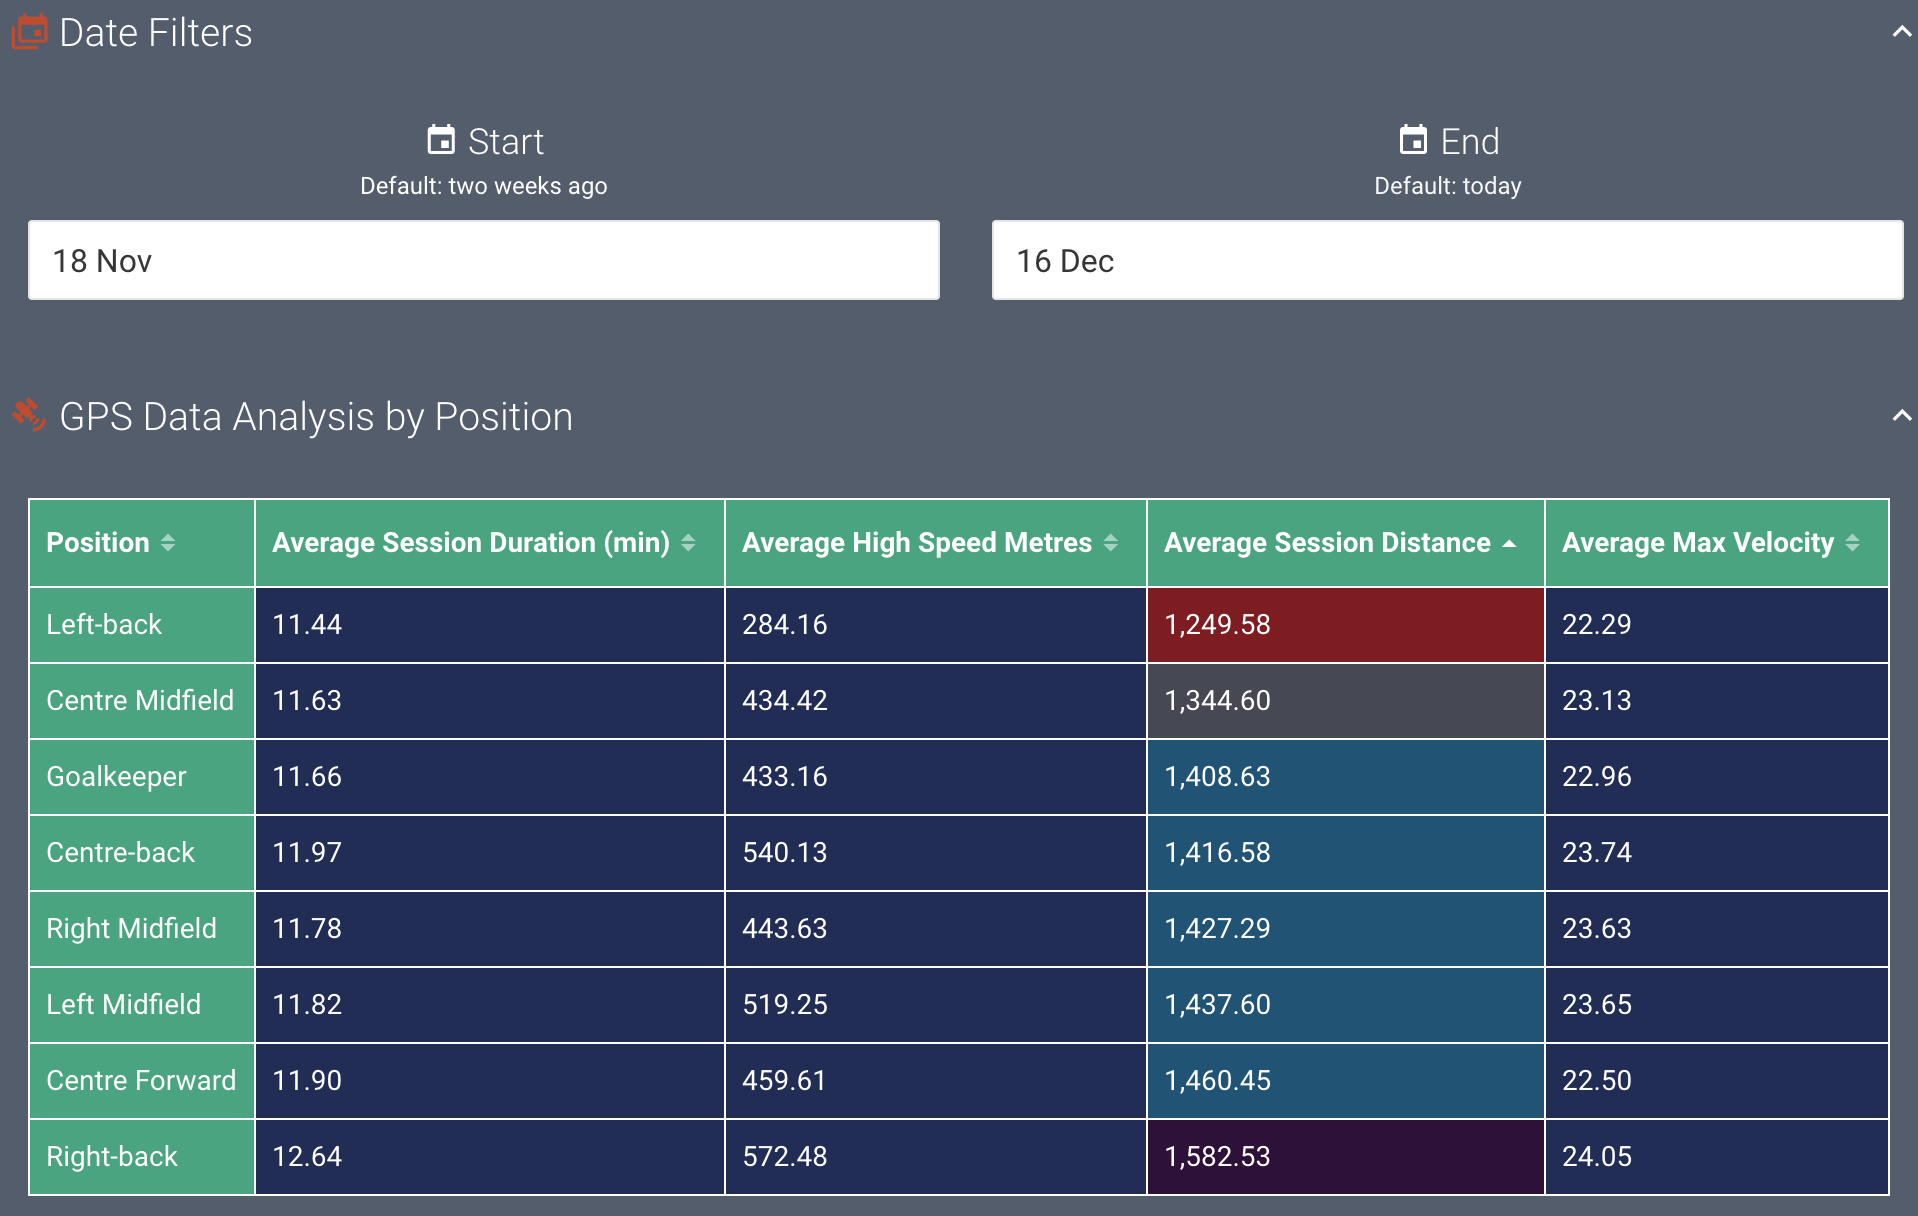 A screenshot showing an example of an aggregation table built using the Smartabase Dashboard builder.